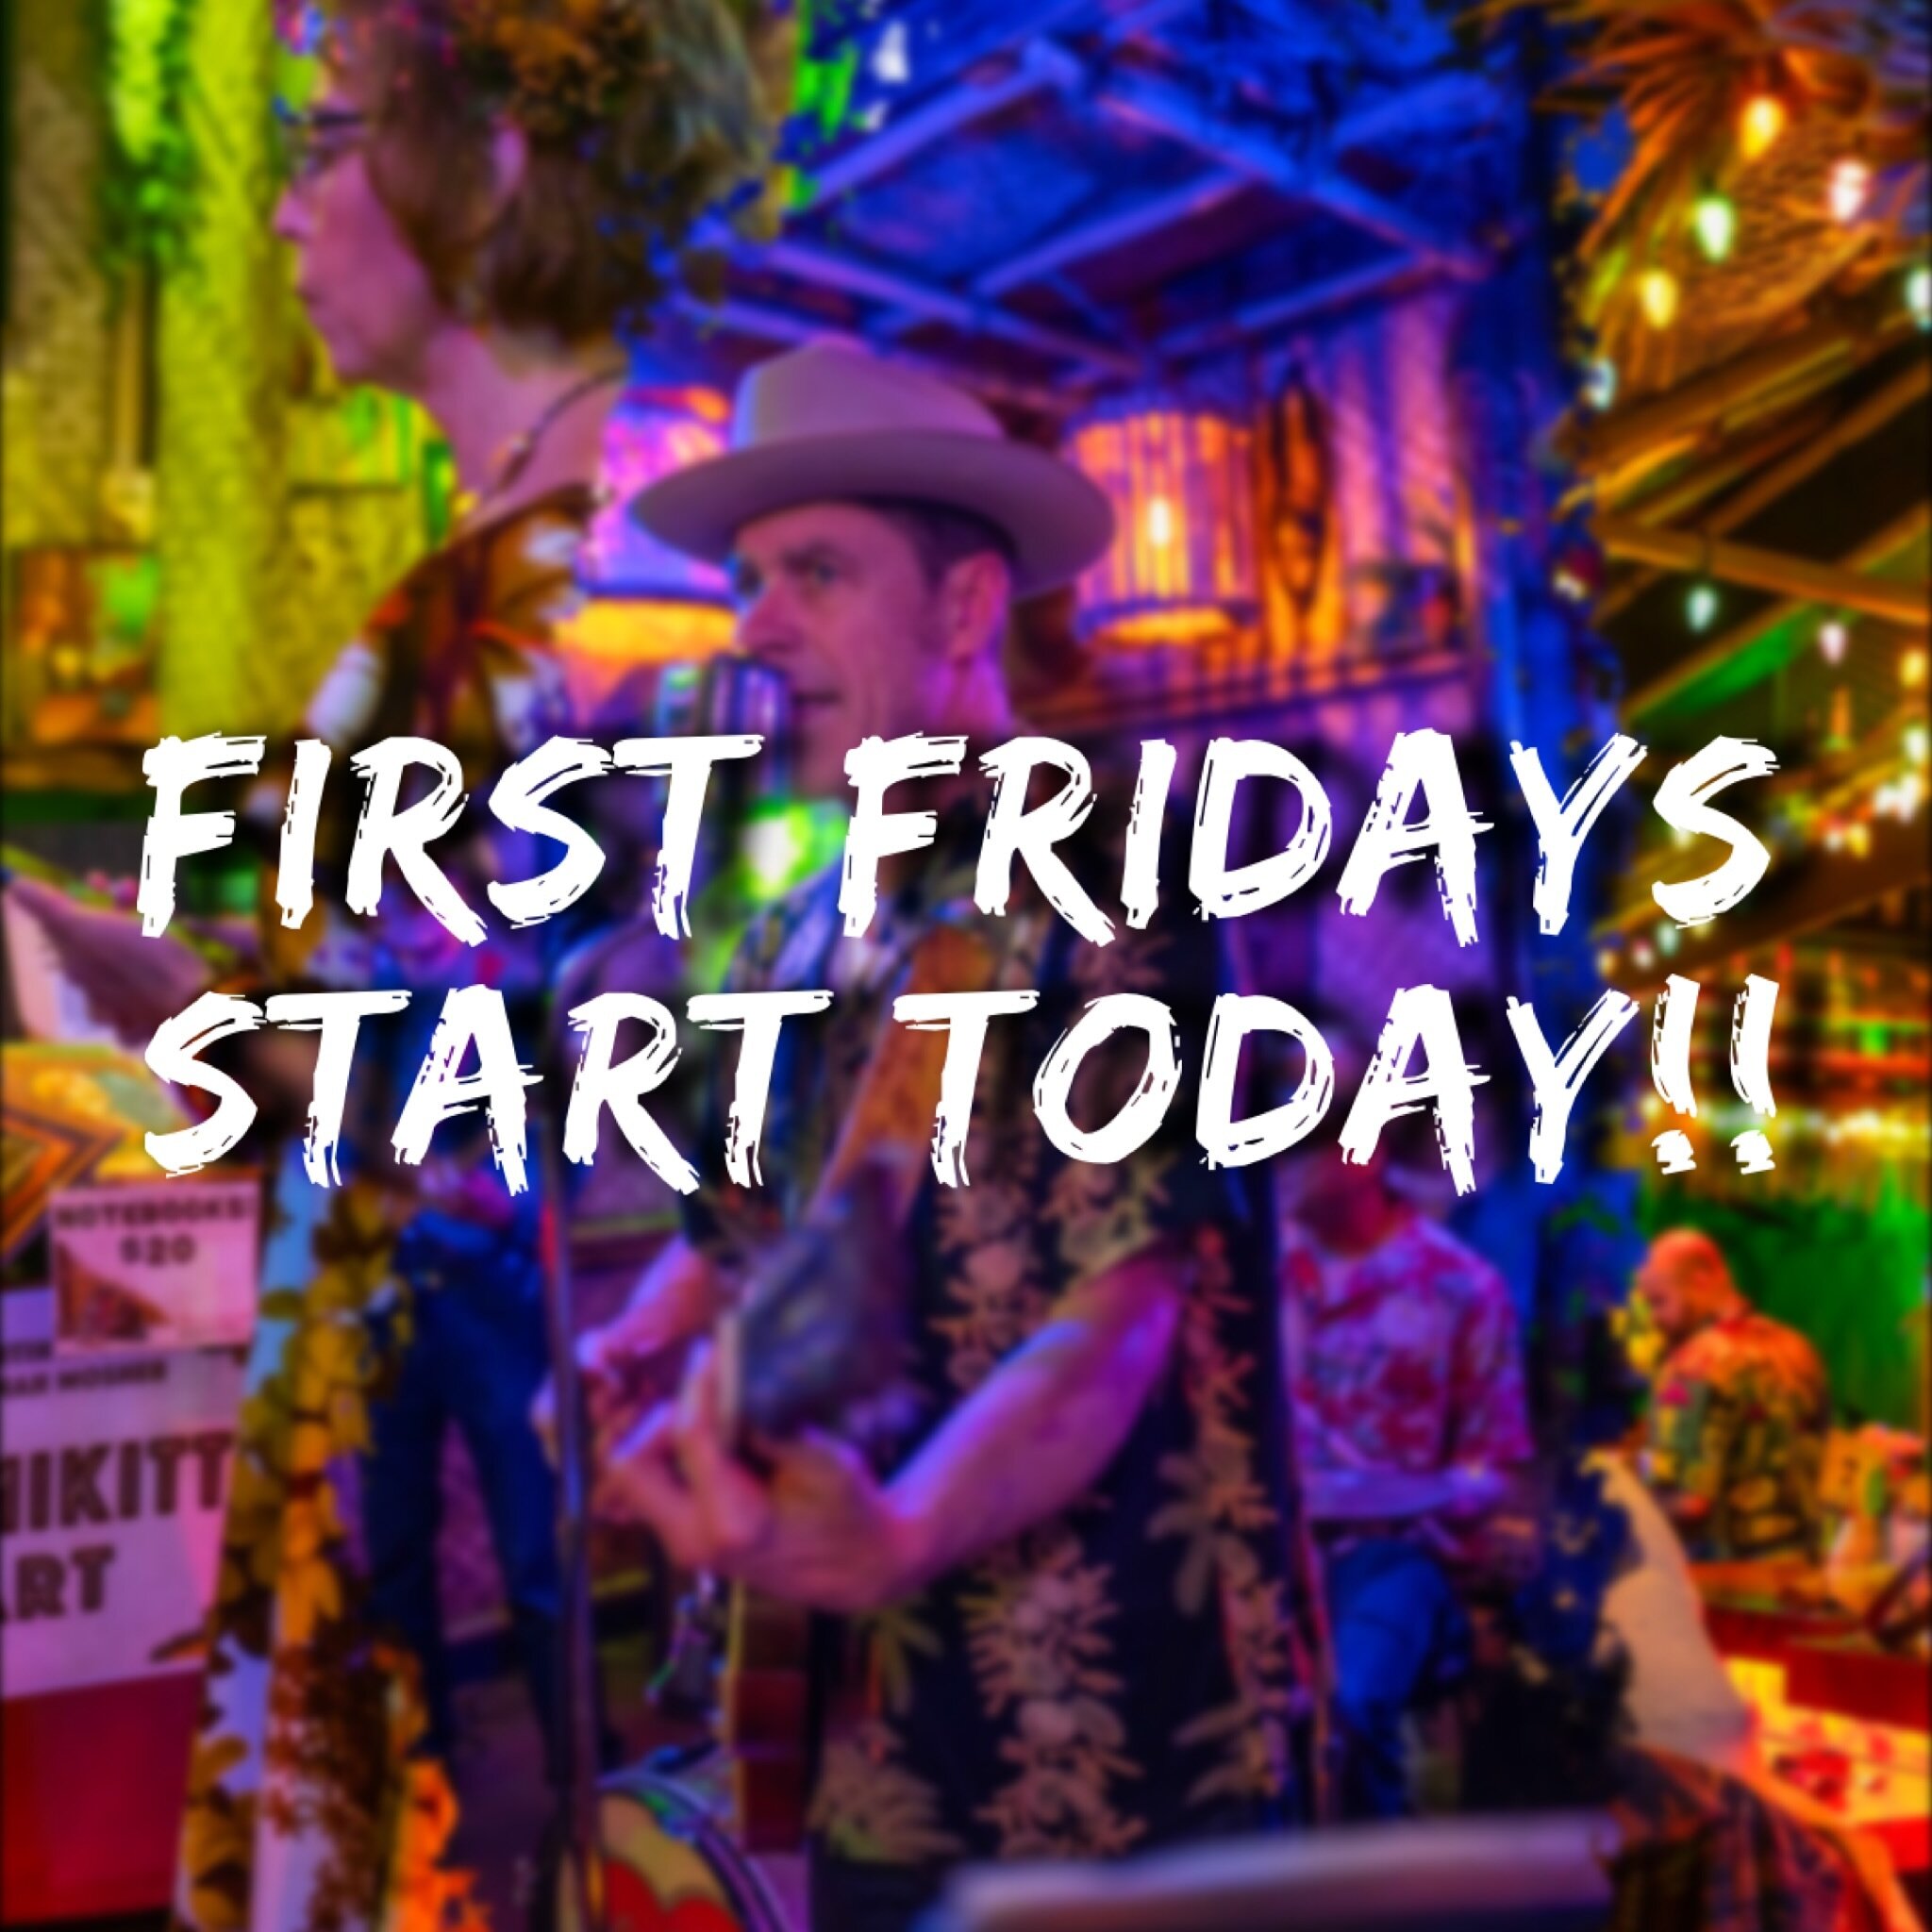 Our very first, First Friday is tonight! Please come out and enjoy some music from @jimmypsycho @djhitone45 and @deadheadrum 

We&rsquo;re so excited that we&rsquo;re going to be throwing a party every first Friday of the month and we can&rsquo;t wai